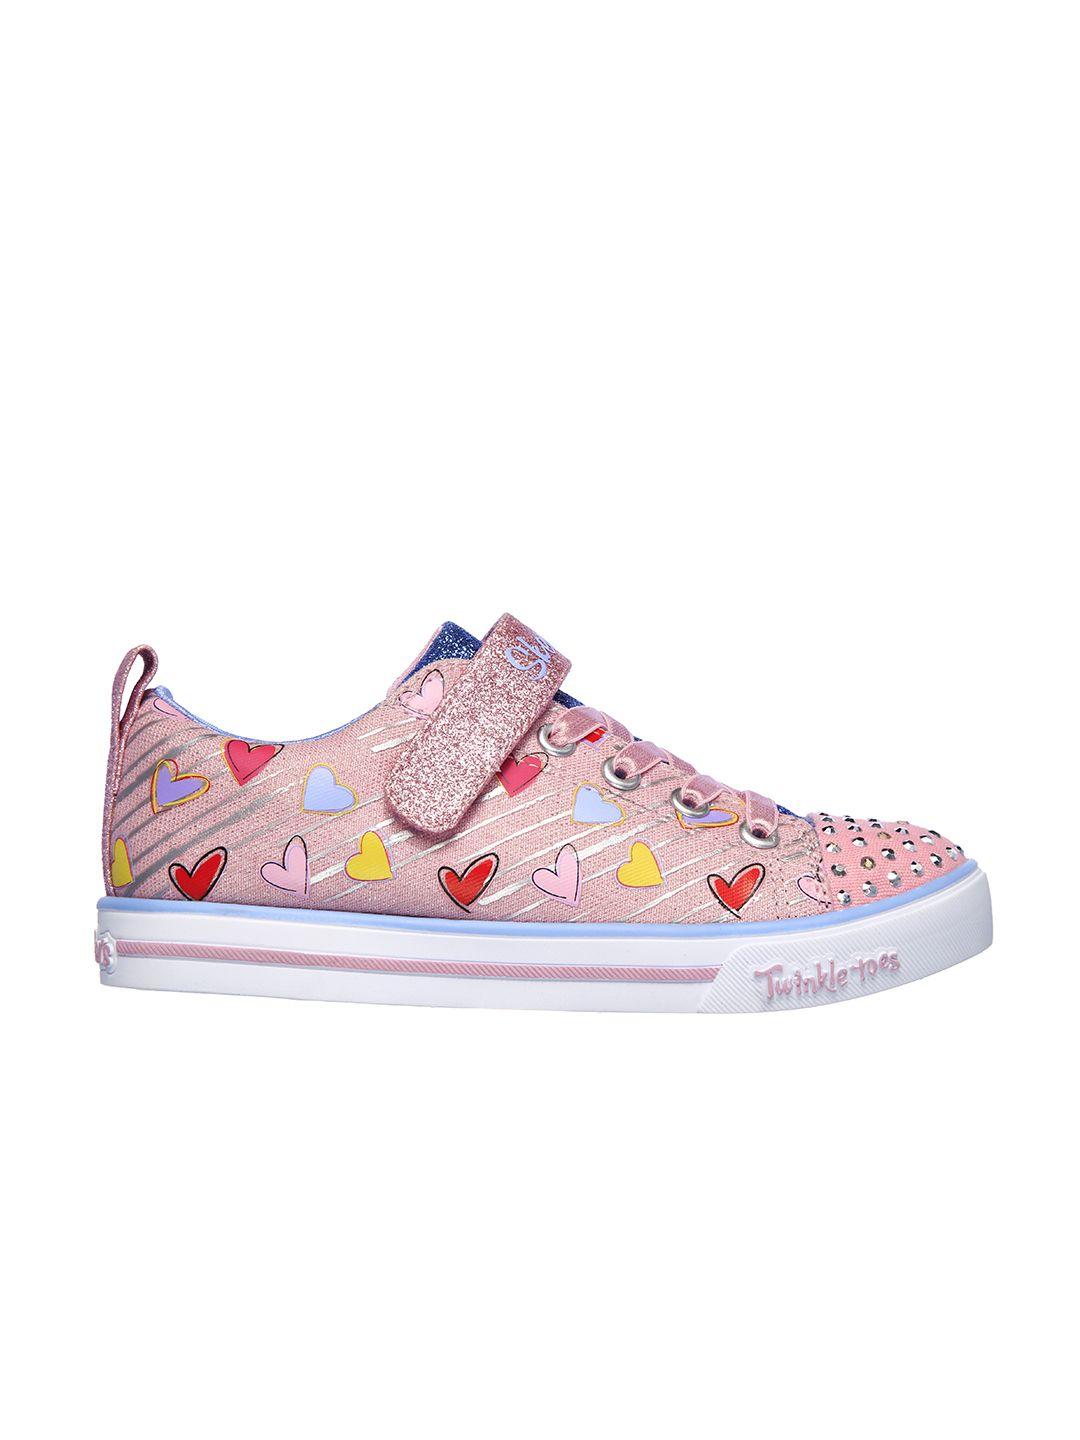 skechers girls printed sparkle lite-heart sketch sneakers with embellished detail